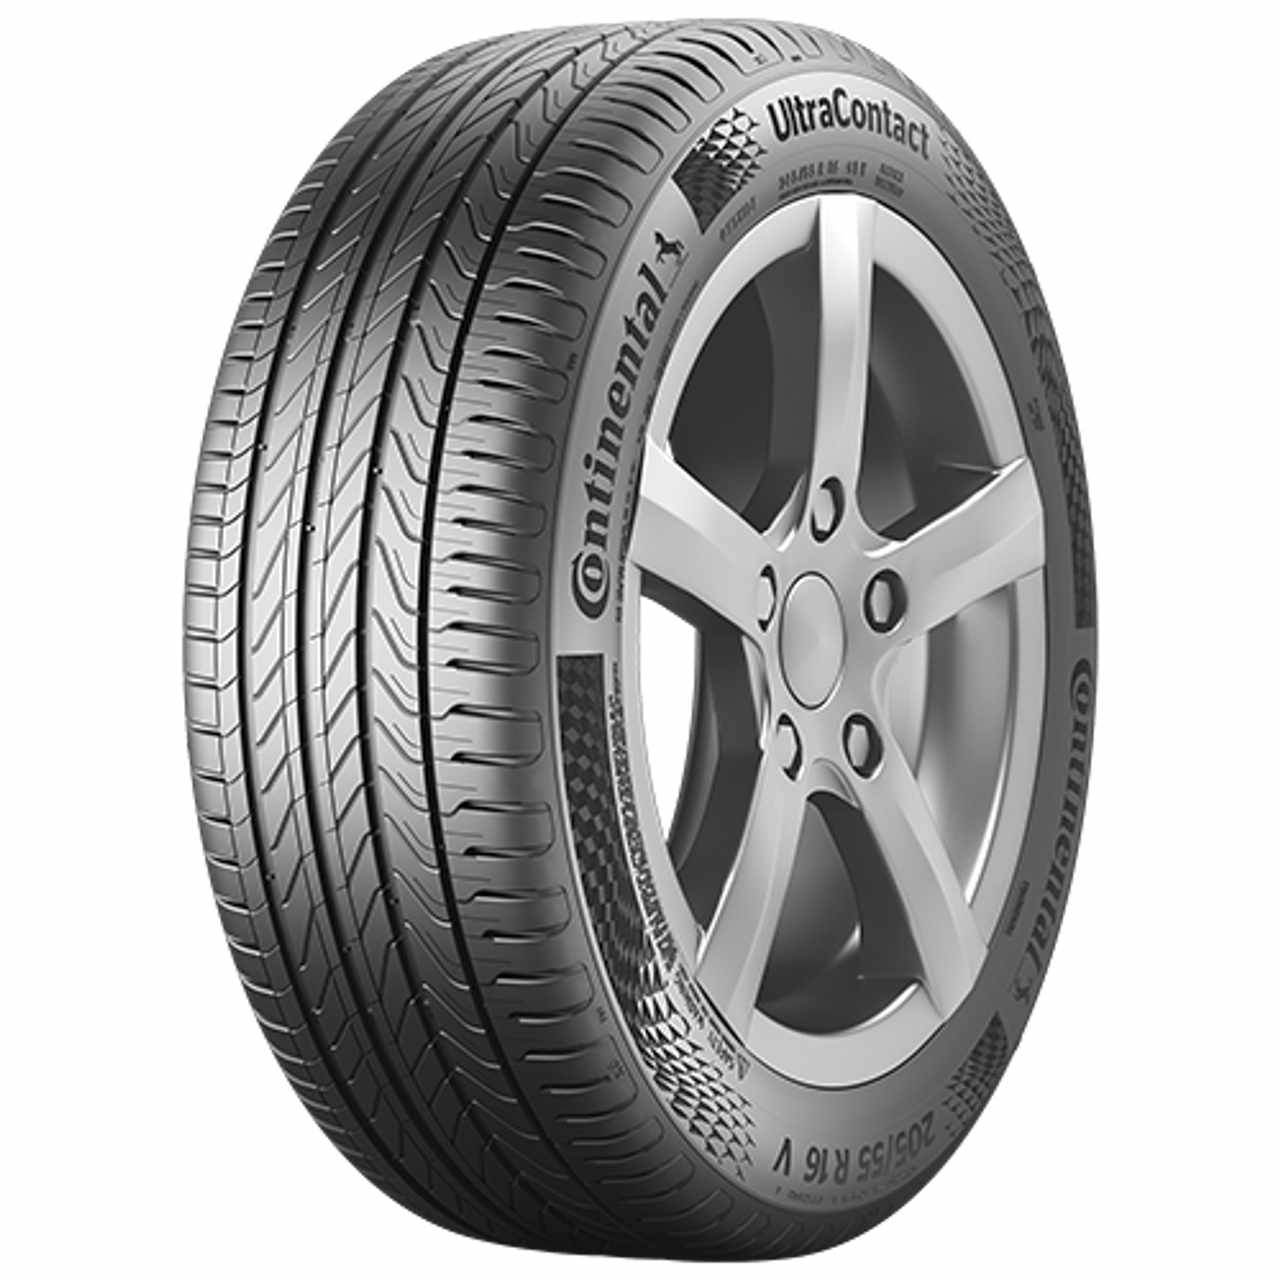 CONTINENTAL ULTRACONTACT (EVc) 155/70R14 77T BSW